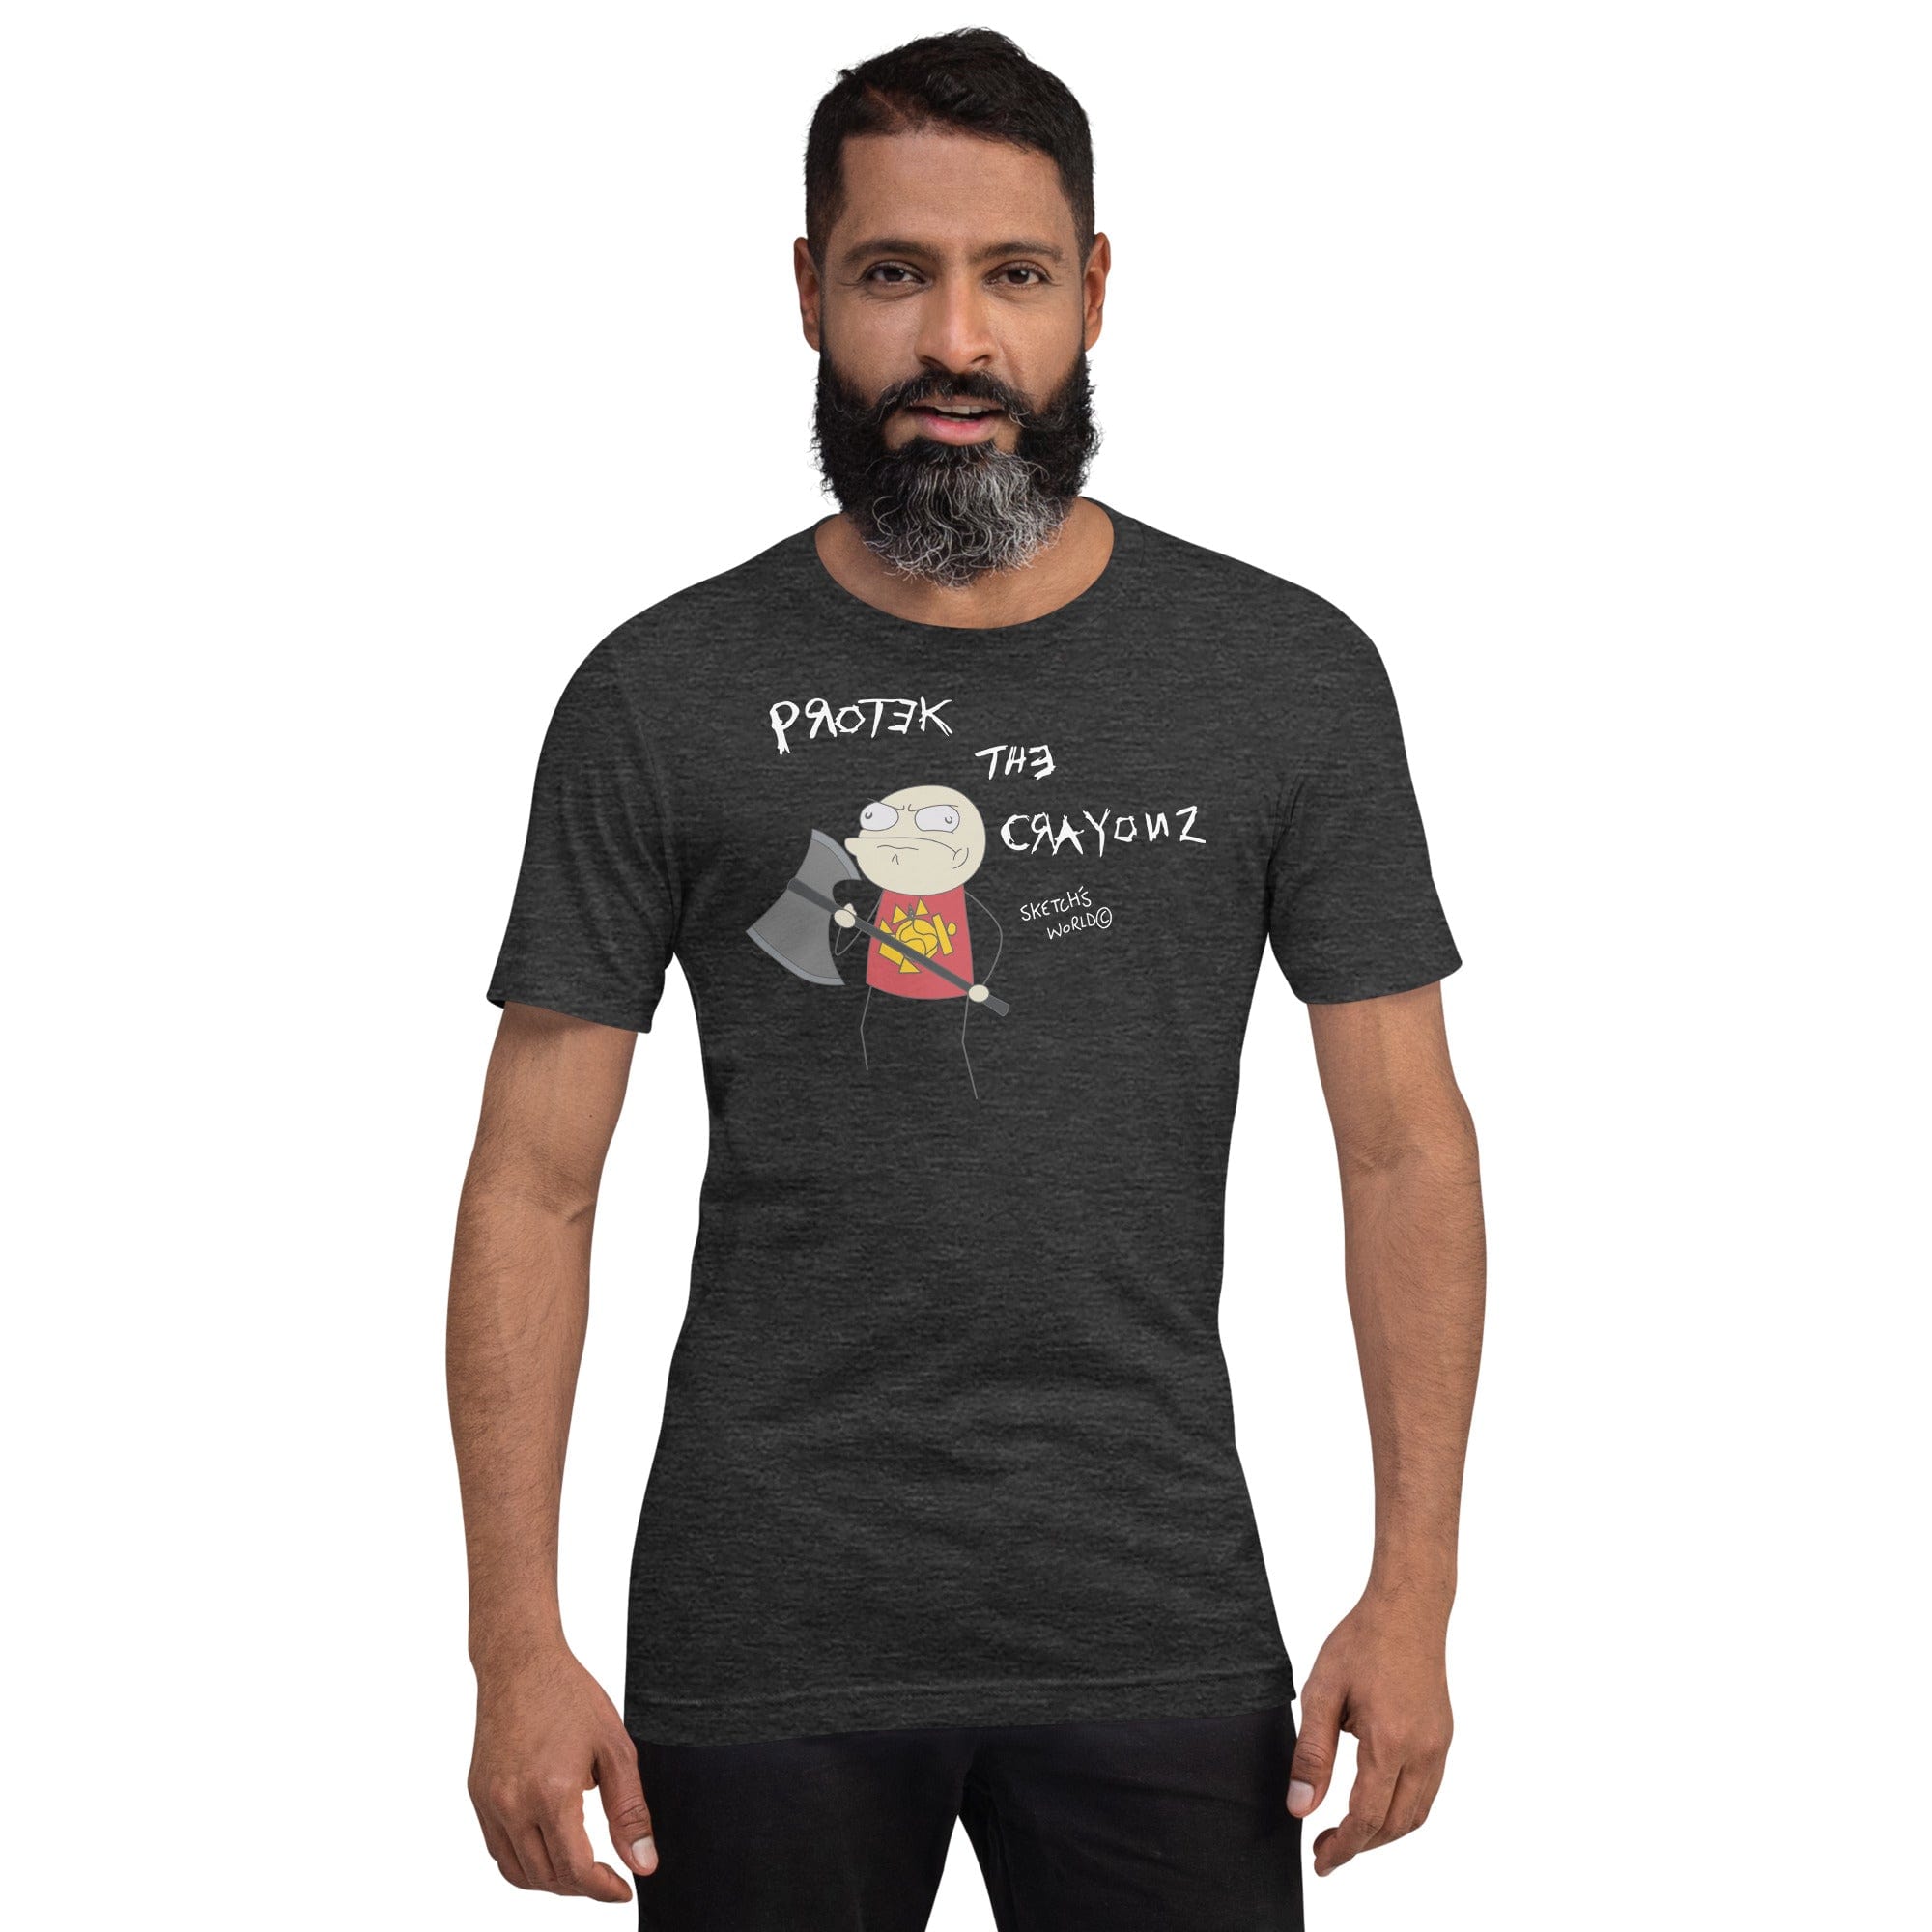 Tactical Gear Junkie Dark Grey Heather / XS Sketch's World © Officially Licensed - Protect the Crayonz Marine Unisex T-Shirt